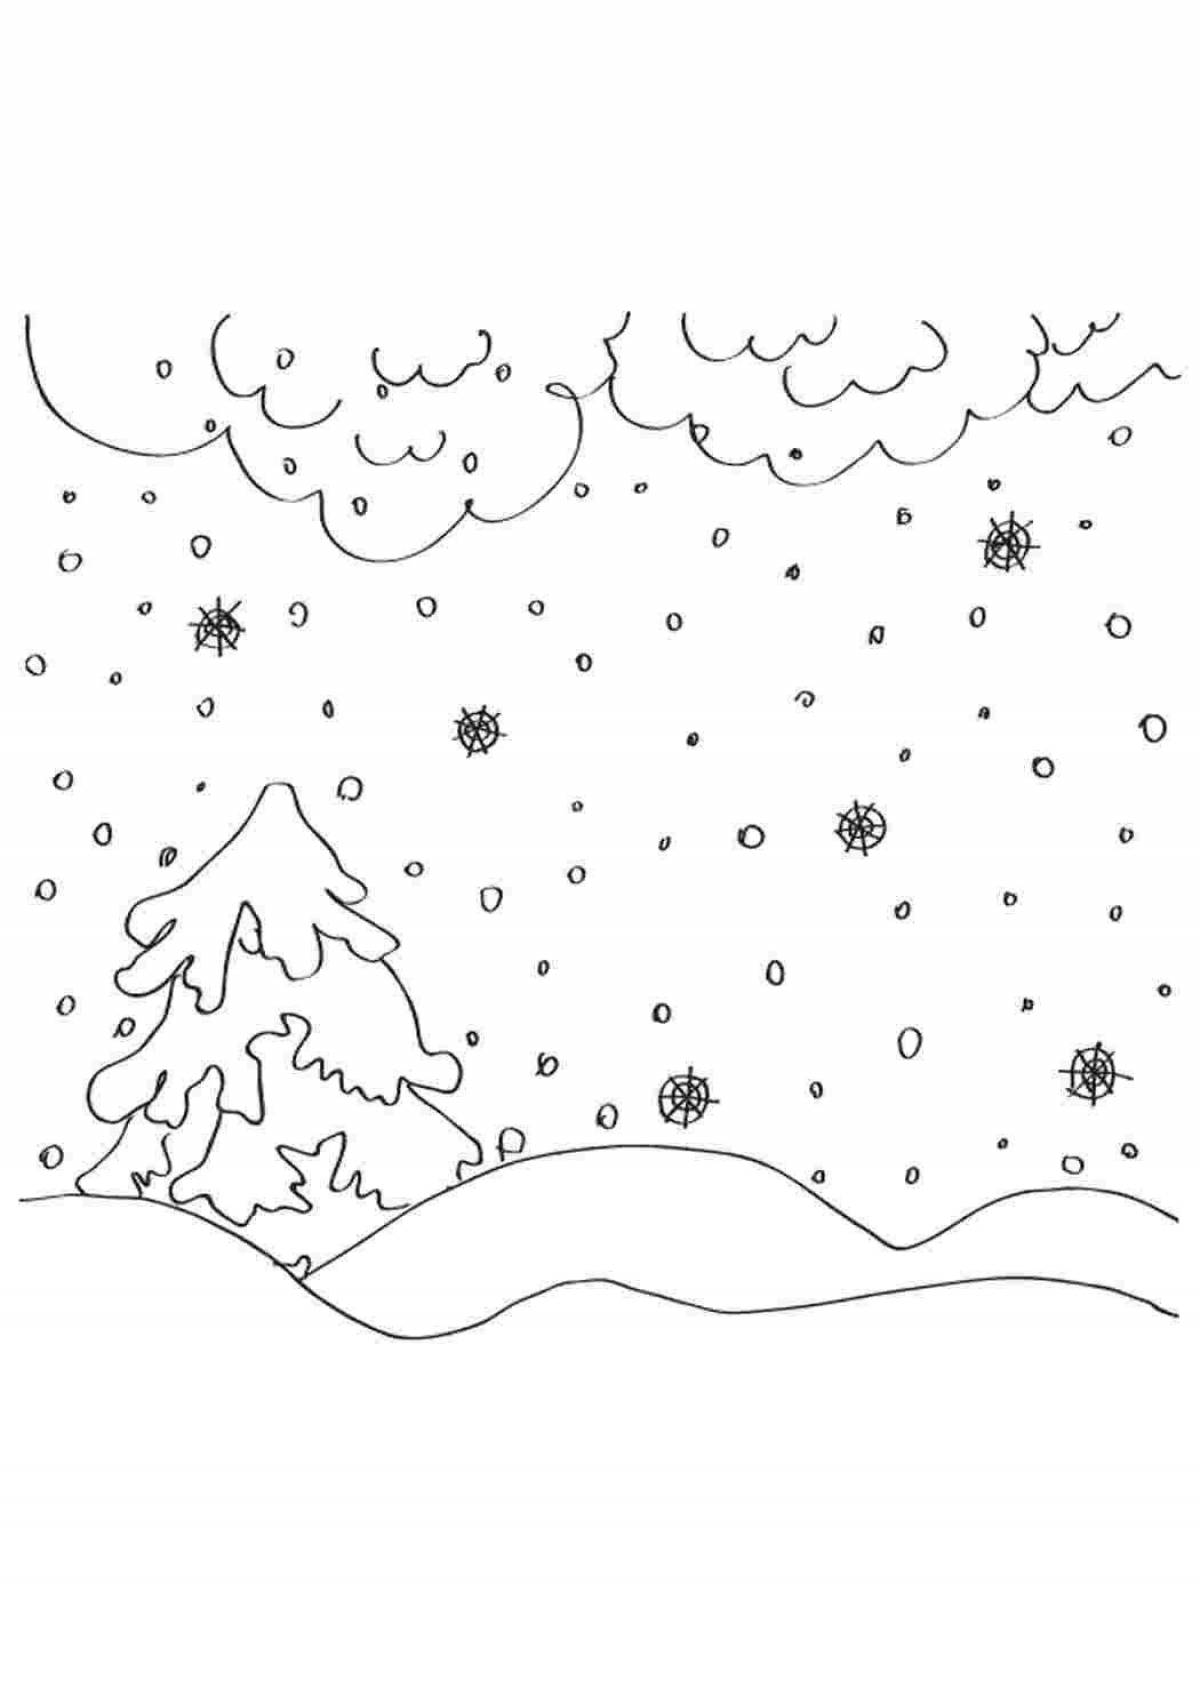 Amazing blizzard coloring book for kids